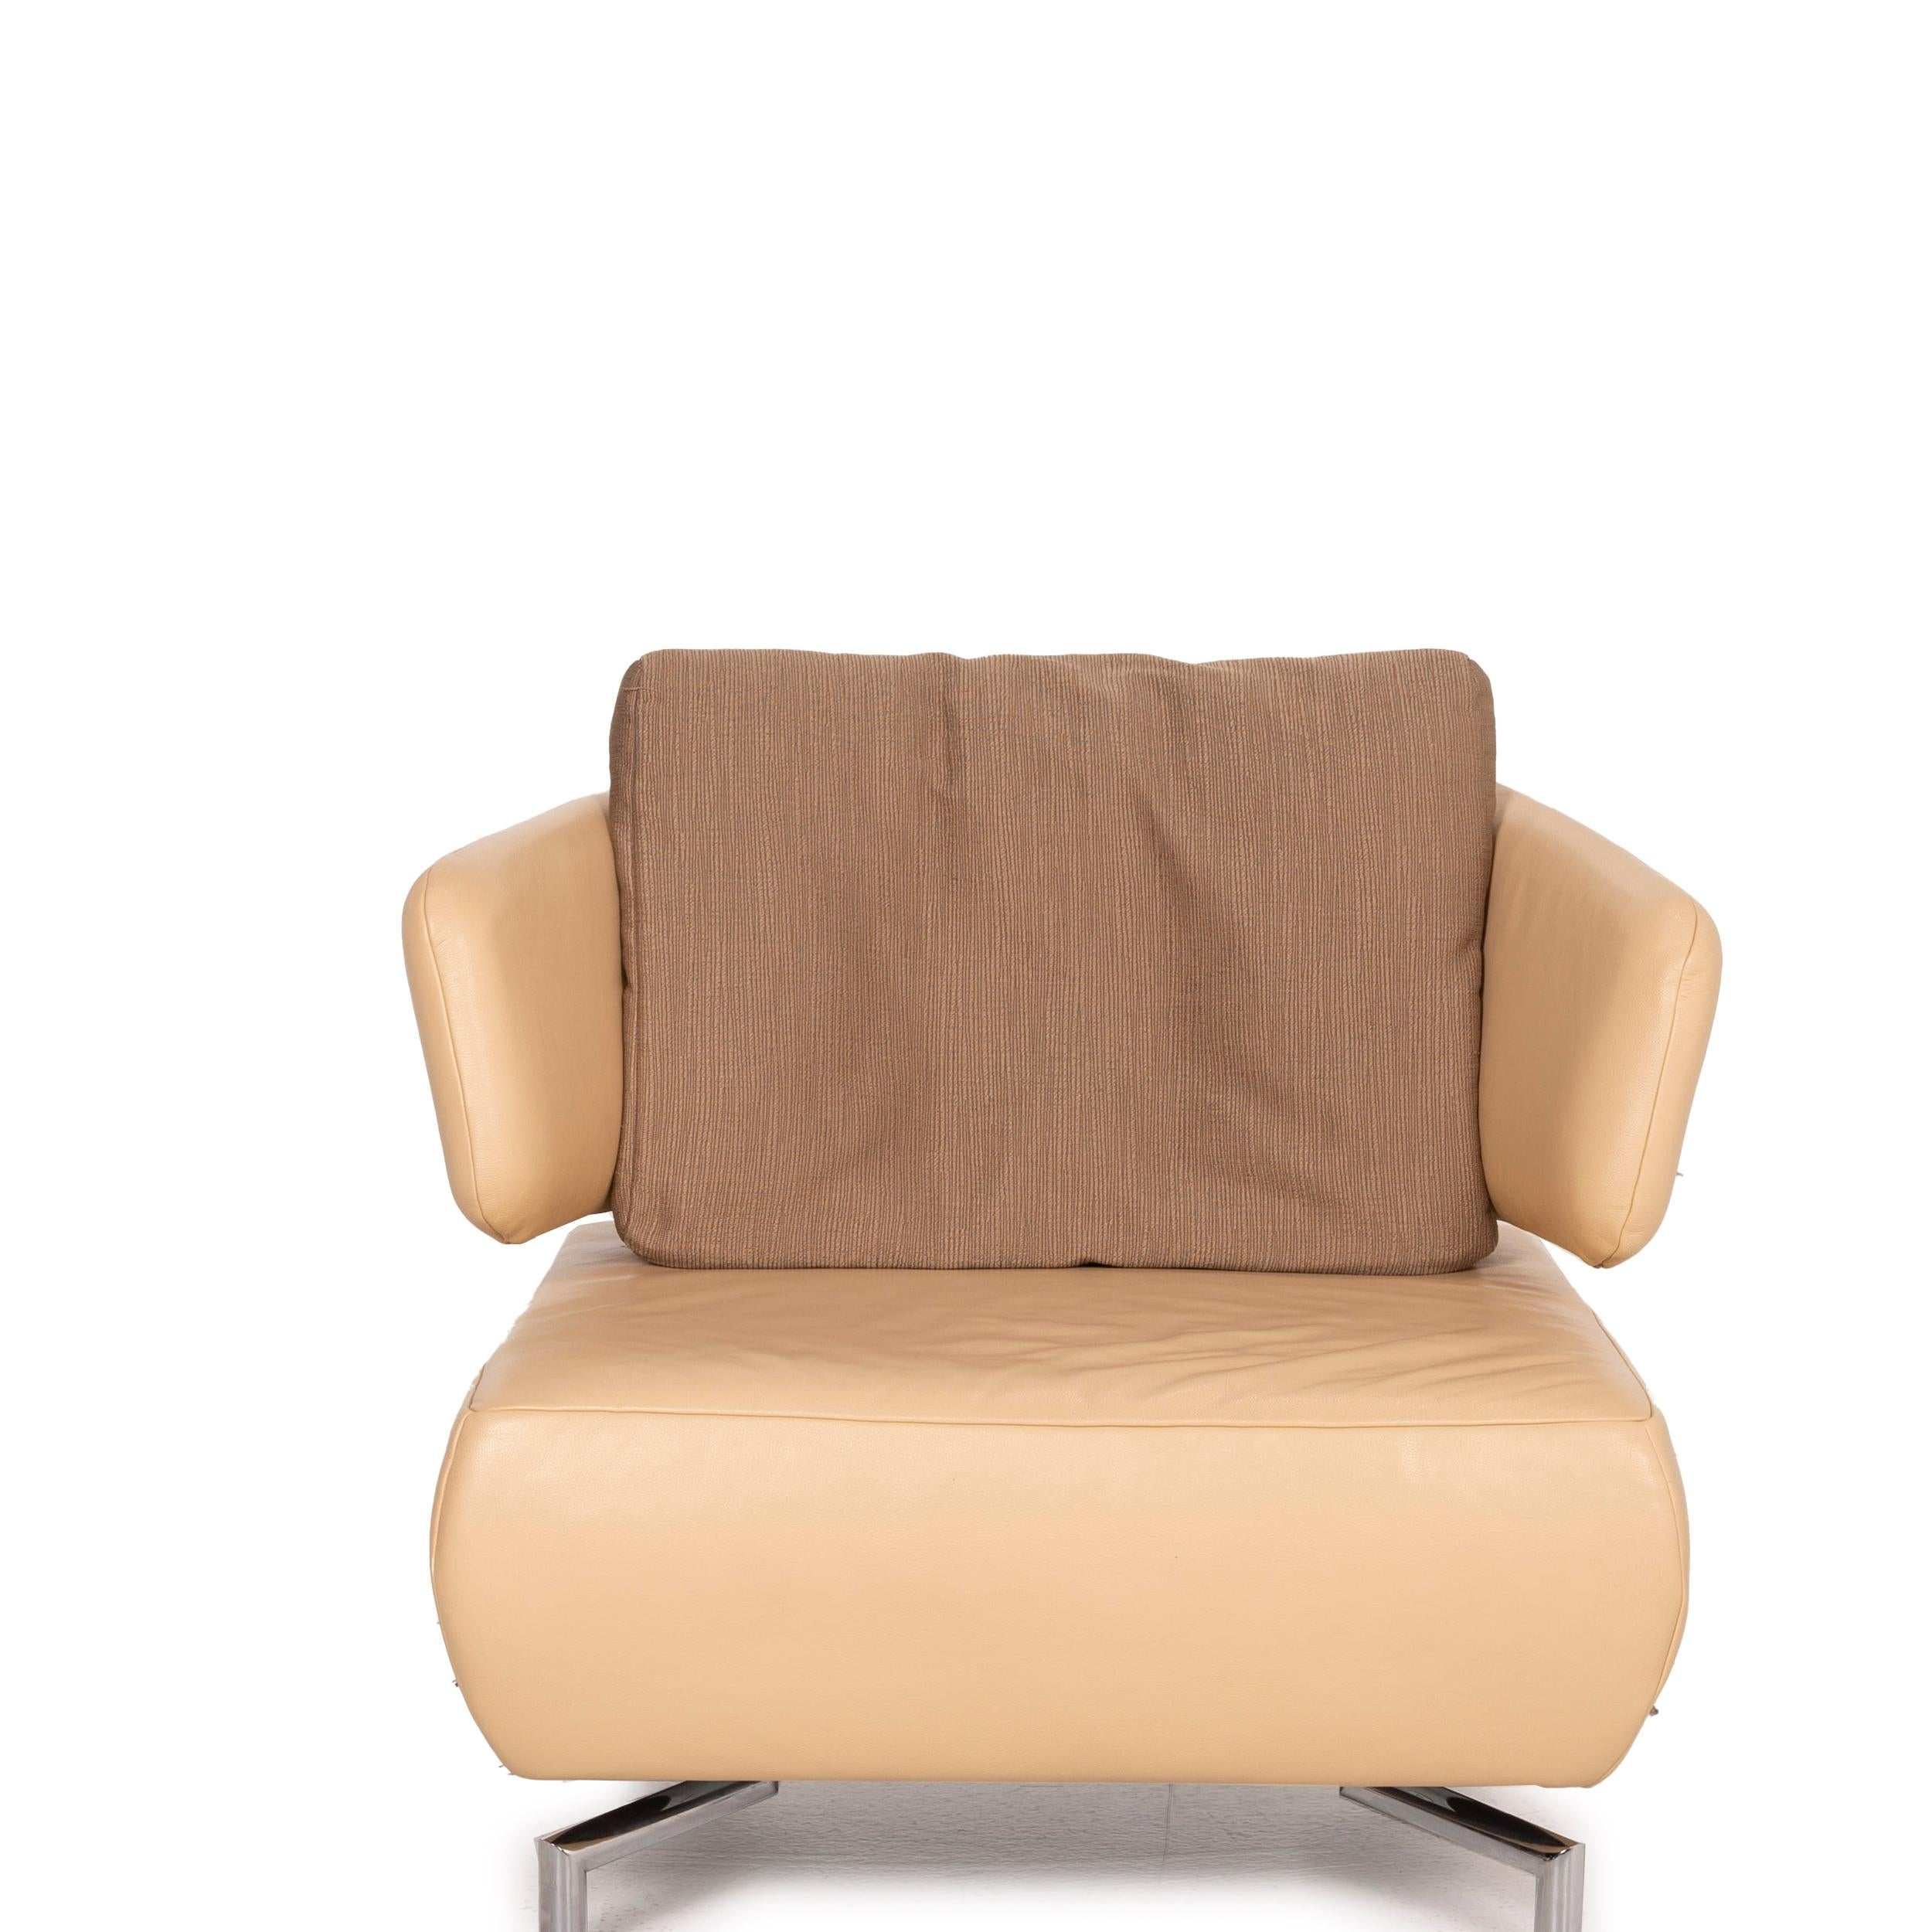 Koinor Leather Armchair in Beige Fabric In Good Condition For Sale In Cologne, DE